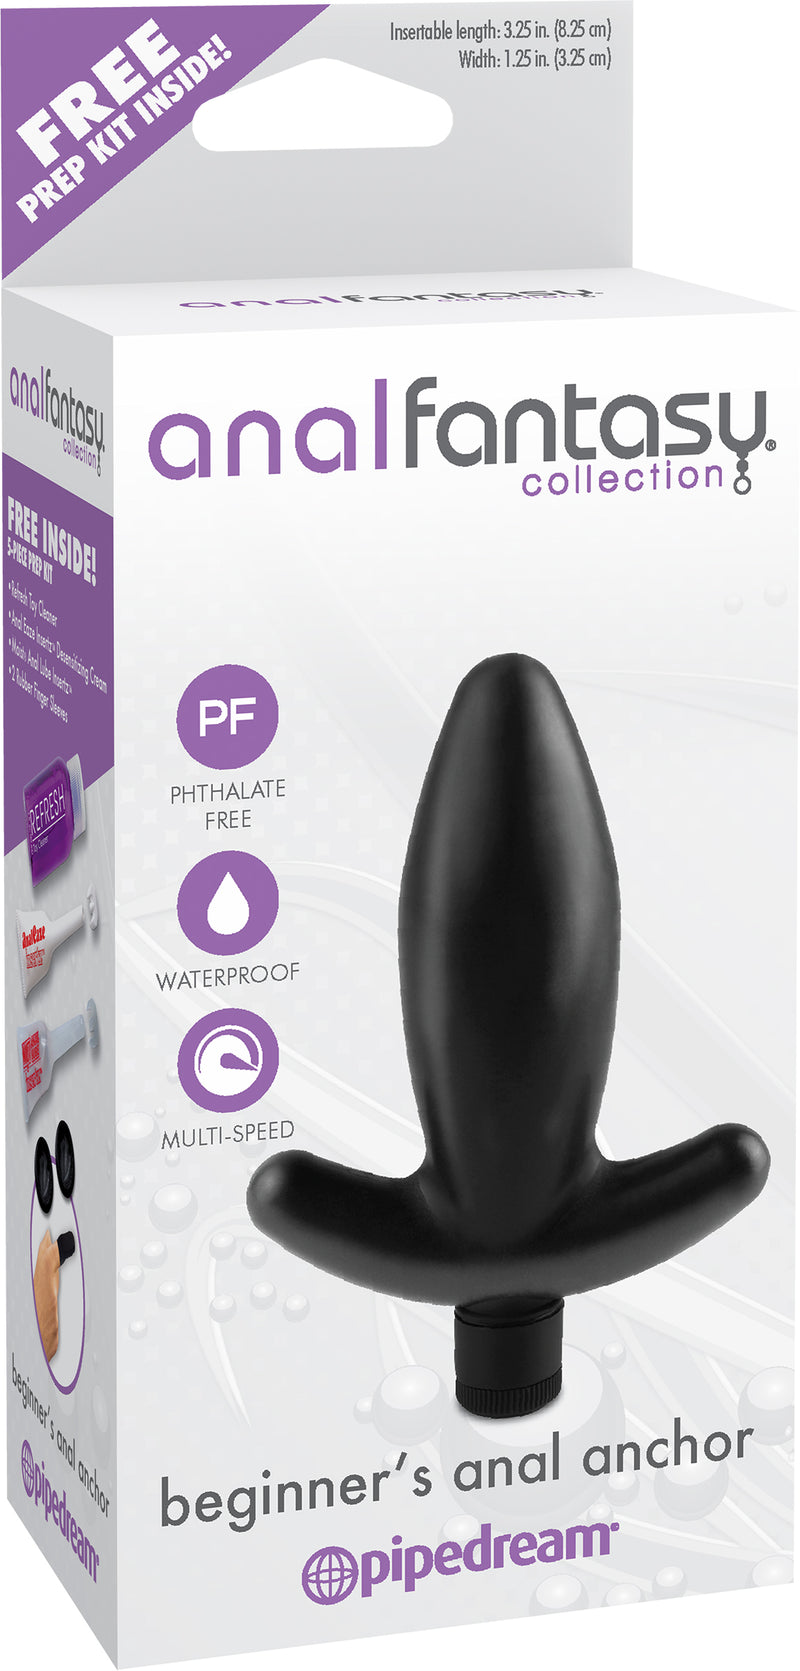 Anal Fantasy Anfänger Anal Anker